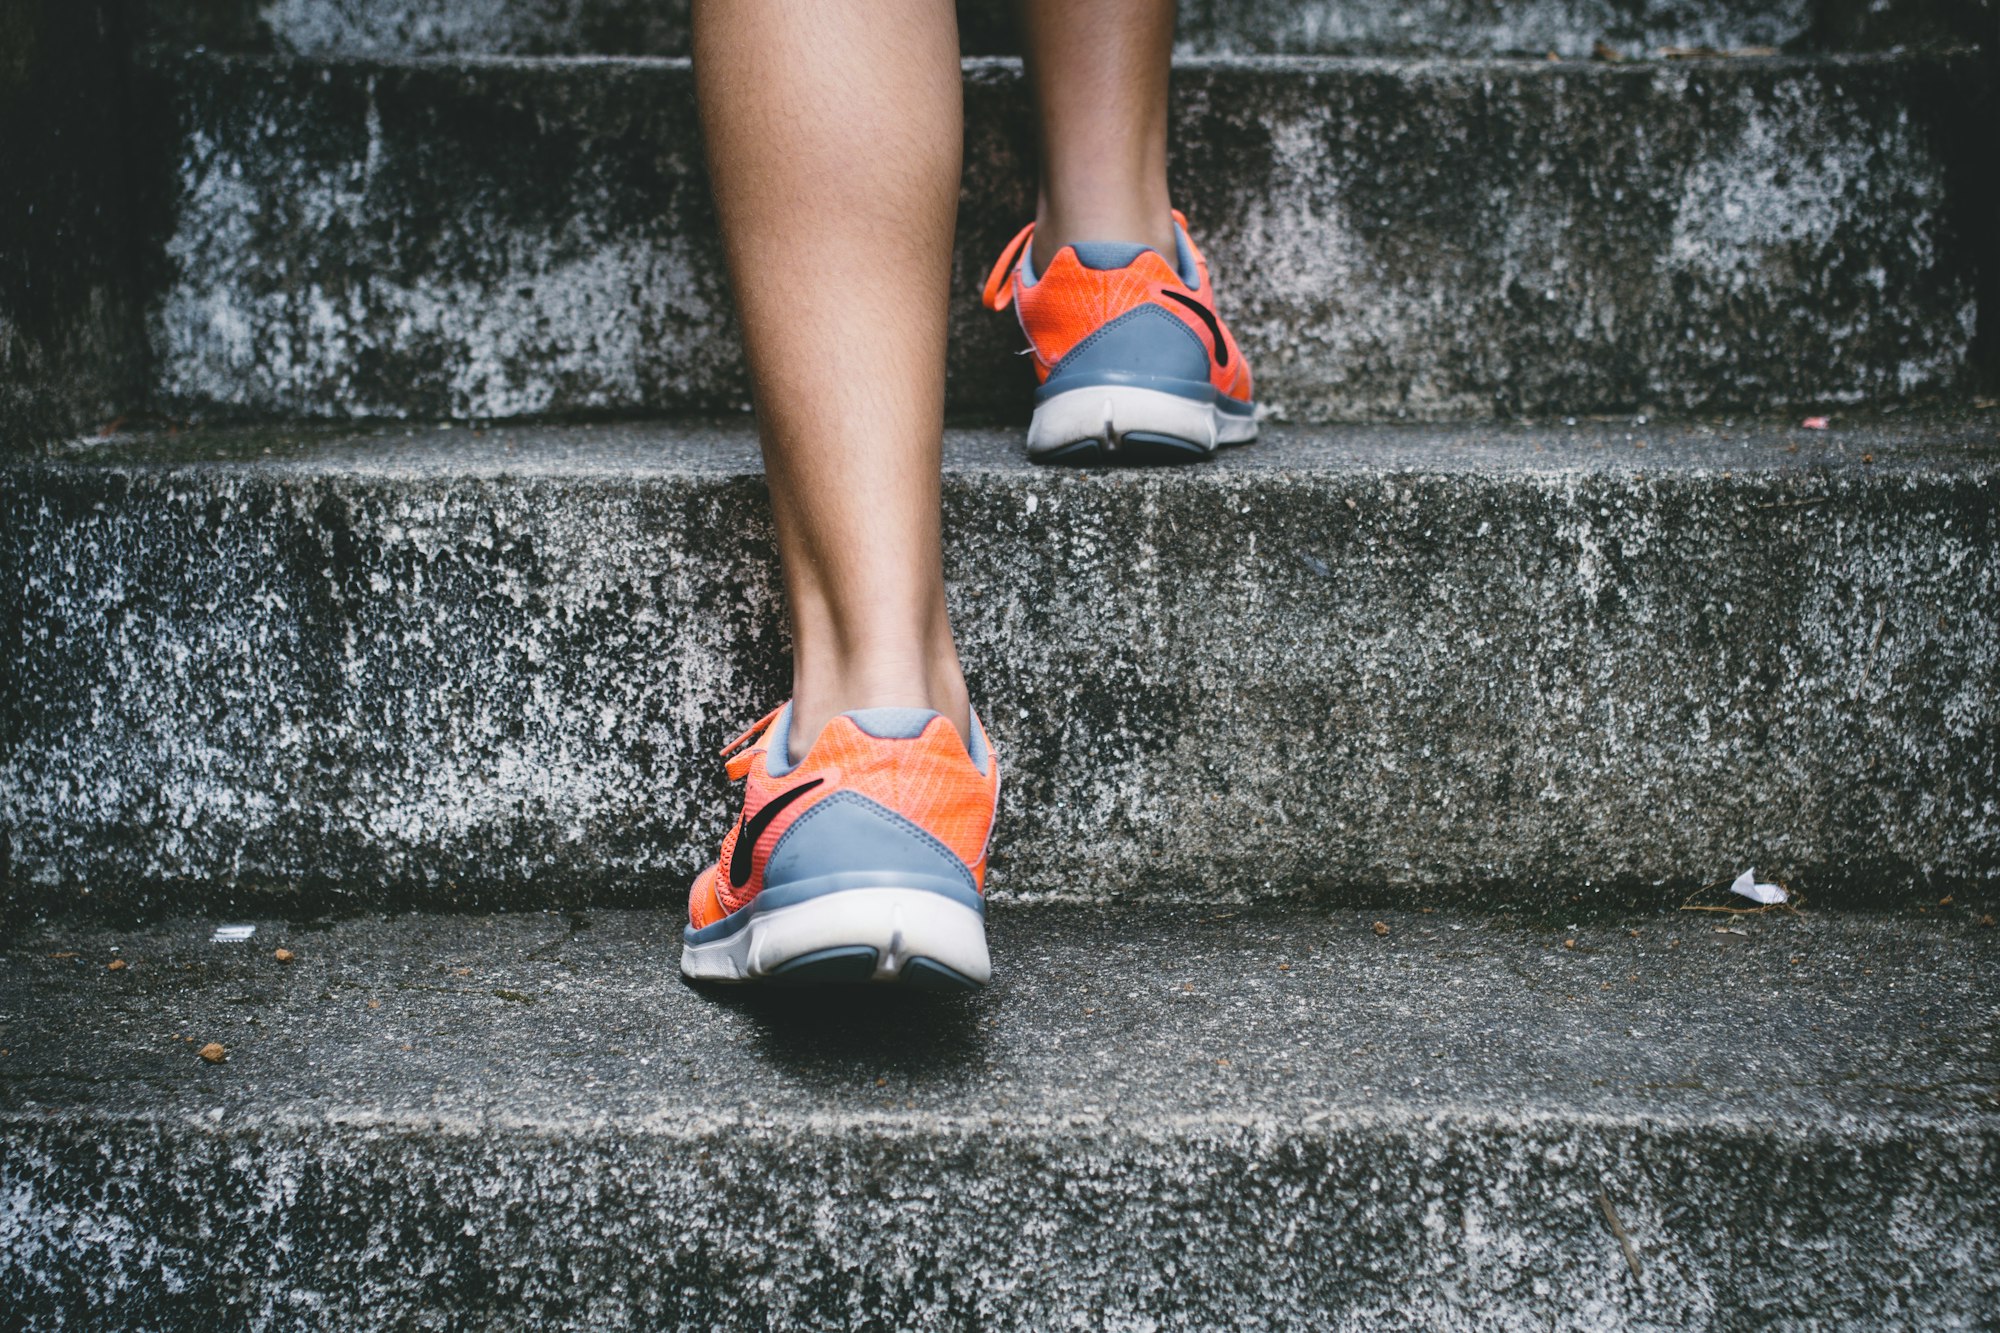 Foot exercising steps in stairs for cardio purpose